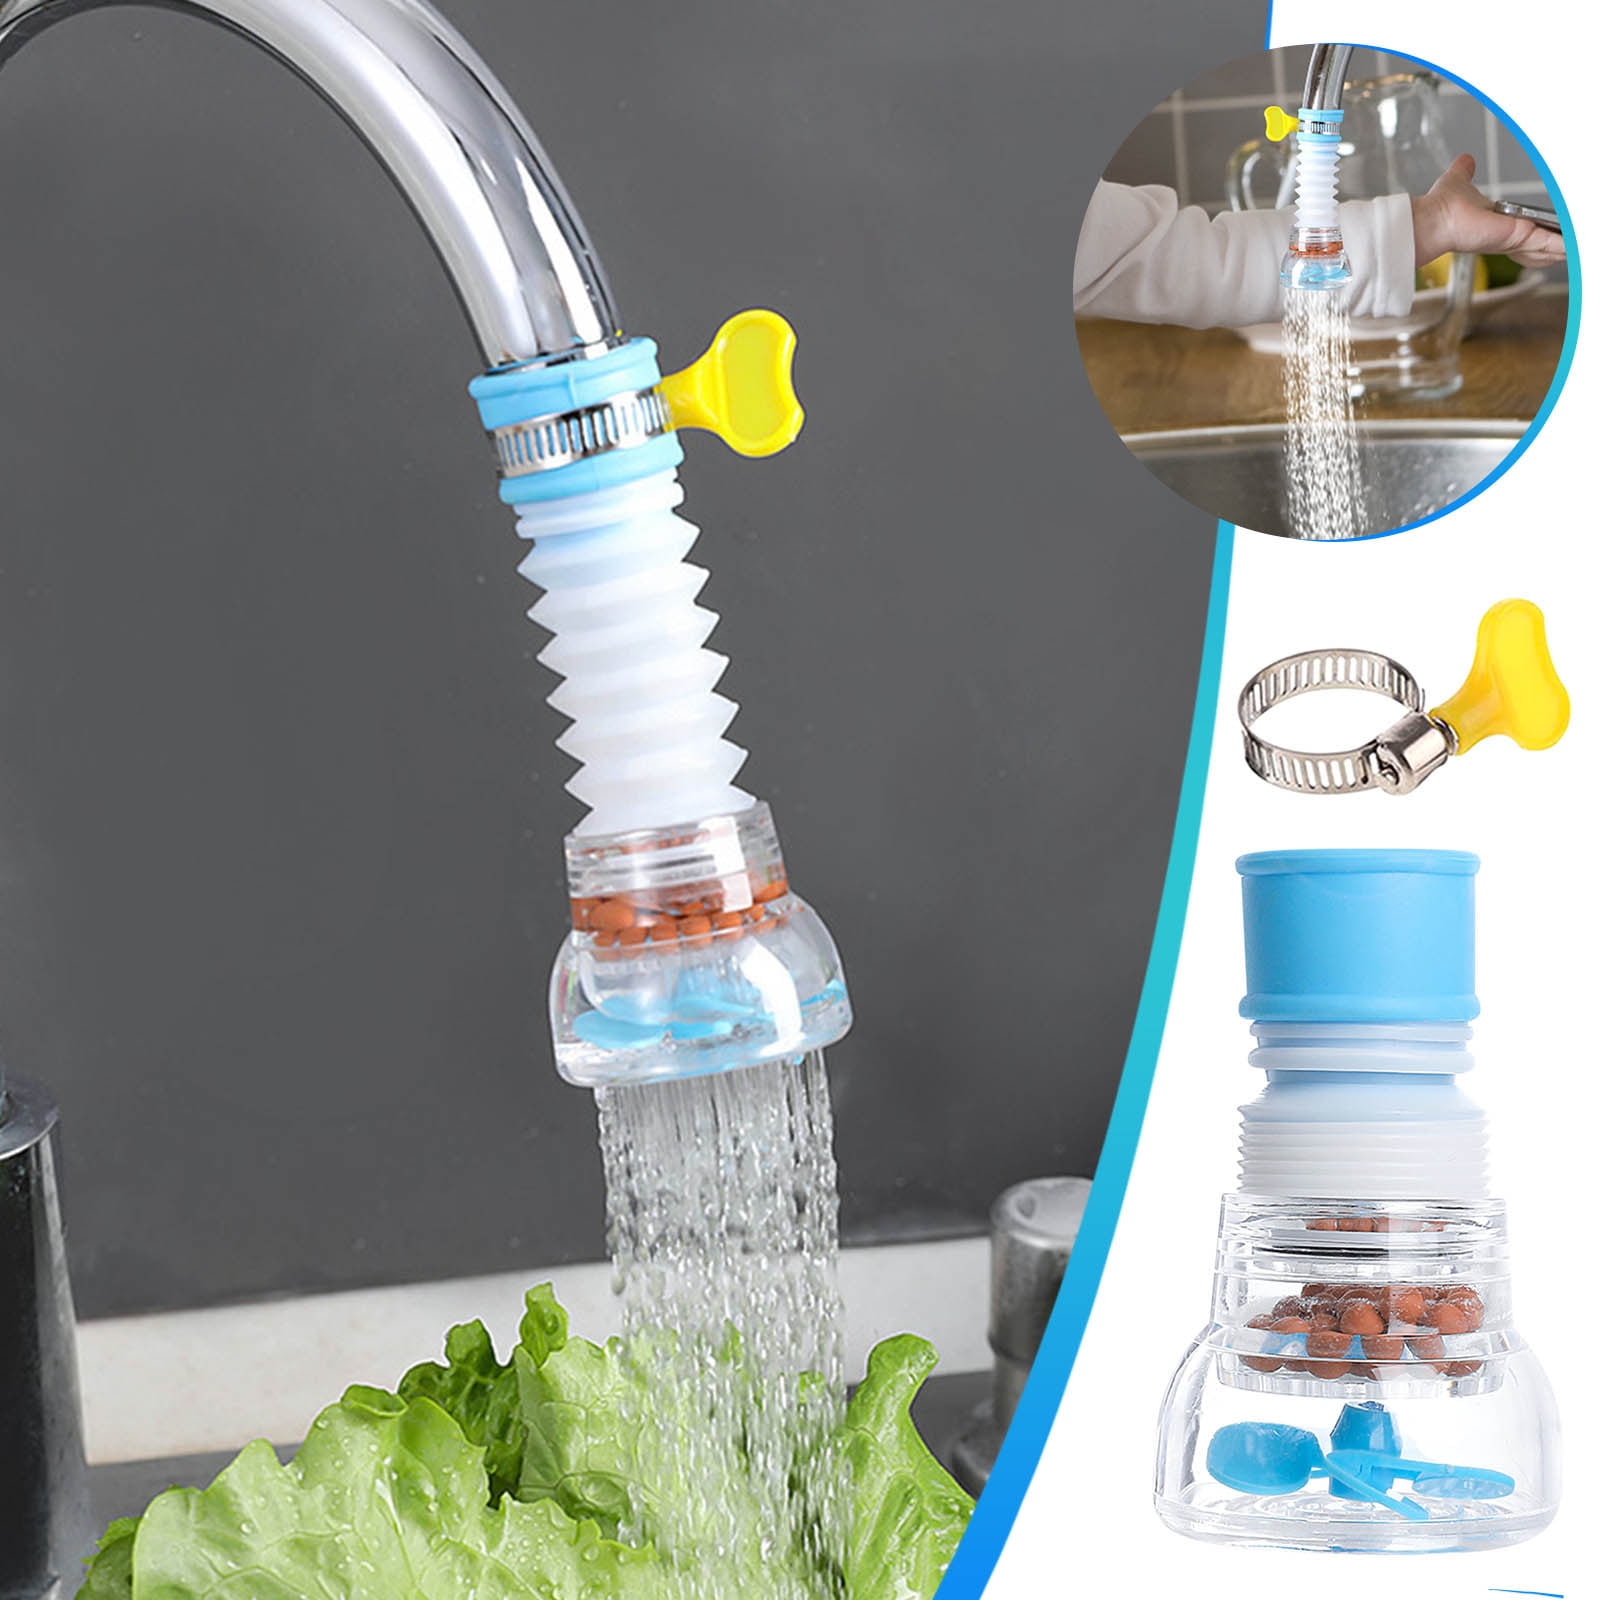 SuoKom Home Kitchen Faucet Water Rotatable The Water Nozzle Splash Proof  Water-saving Device Filter Valve-Clasp